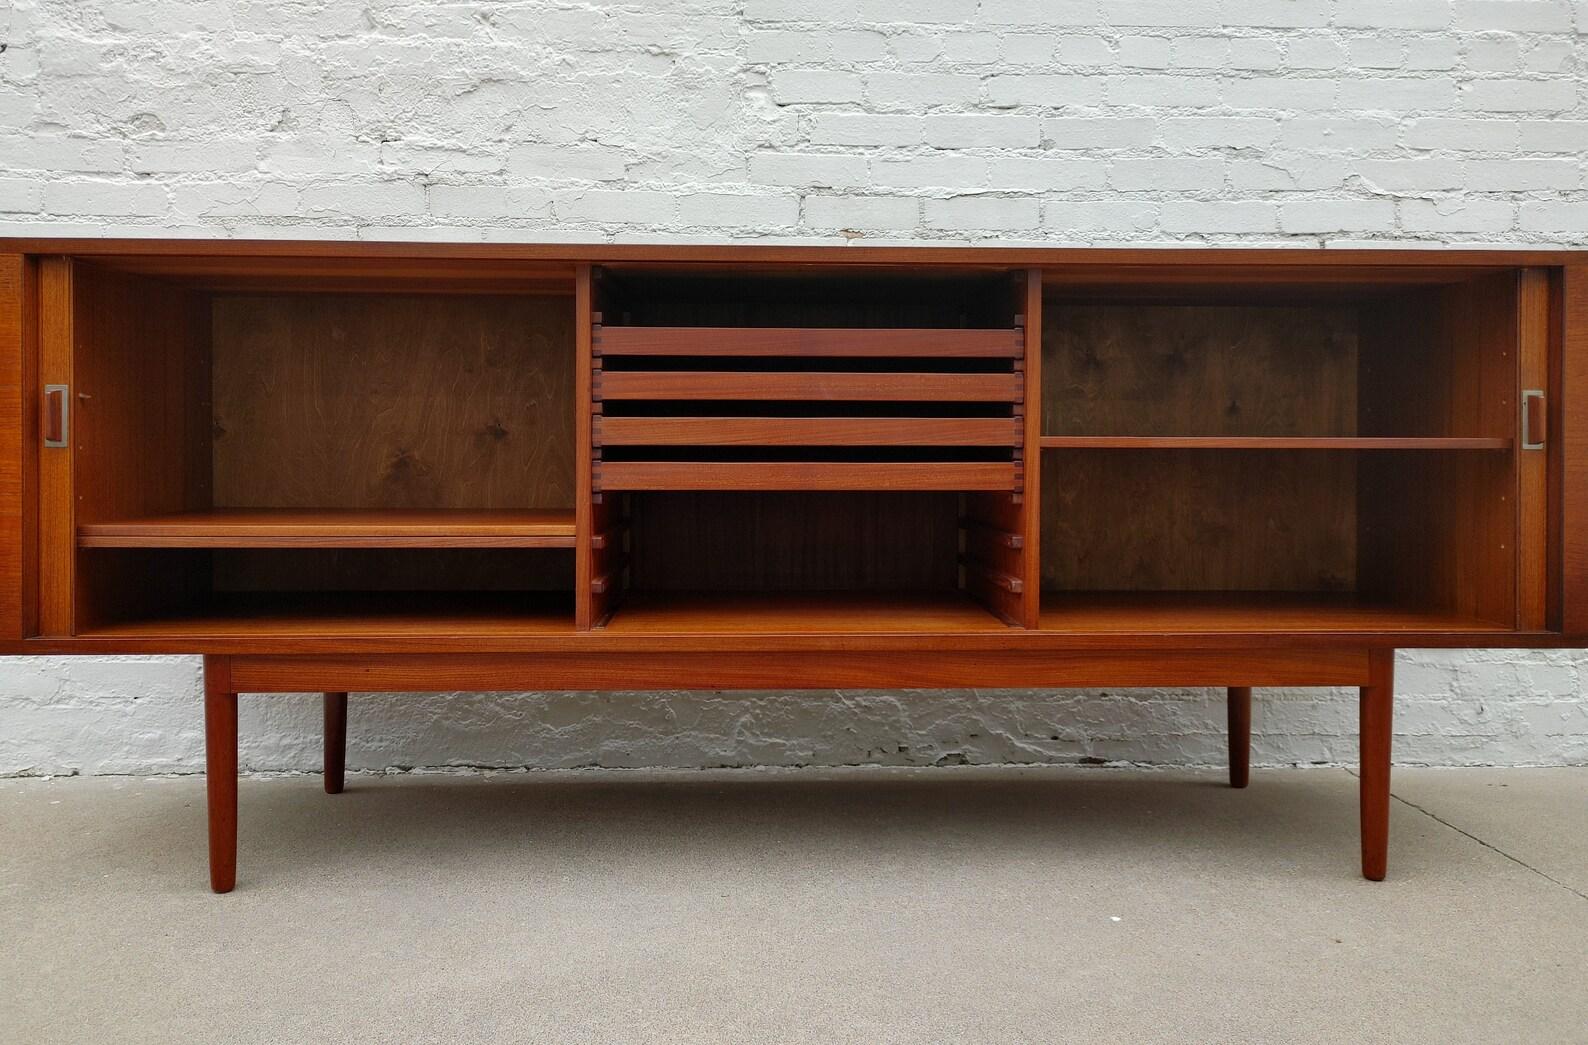 Mid Century Modern Sideboard by Jens Quistgaard for Loving Neilsen

Above average vintage condition and structurally sound. Has some expected slight finish wear and scratching. 

Additional information:
Materials: Teak
Vintage from the